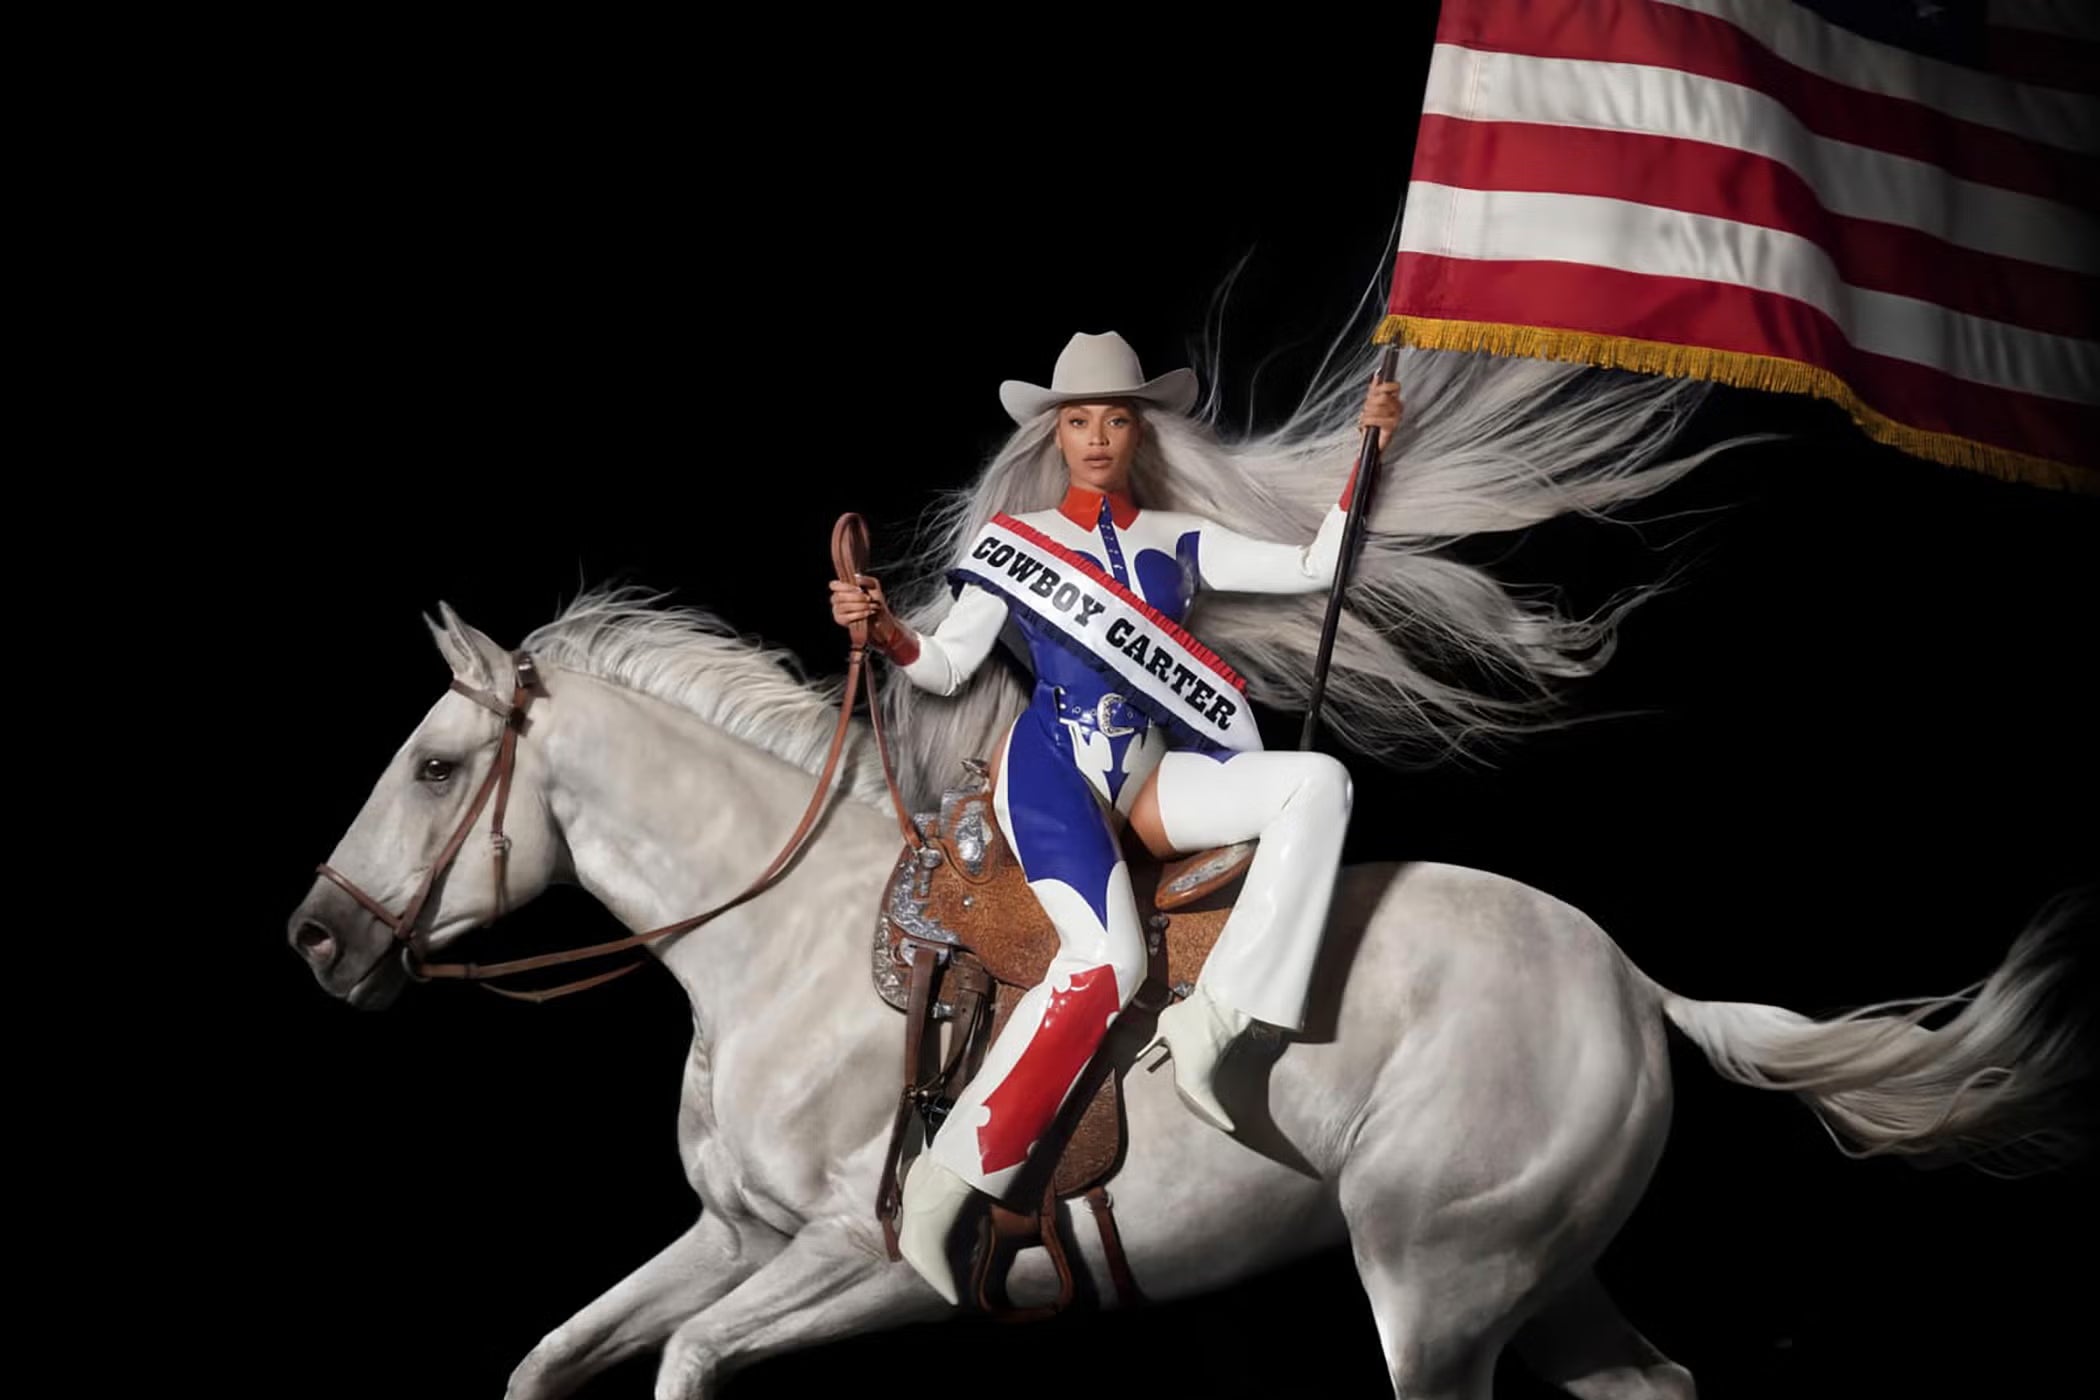 Beyonce in artwork for her new album, ‘Cowboy Carter’